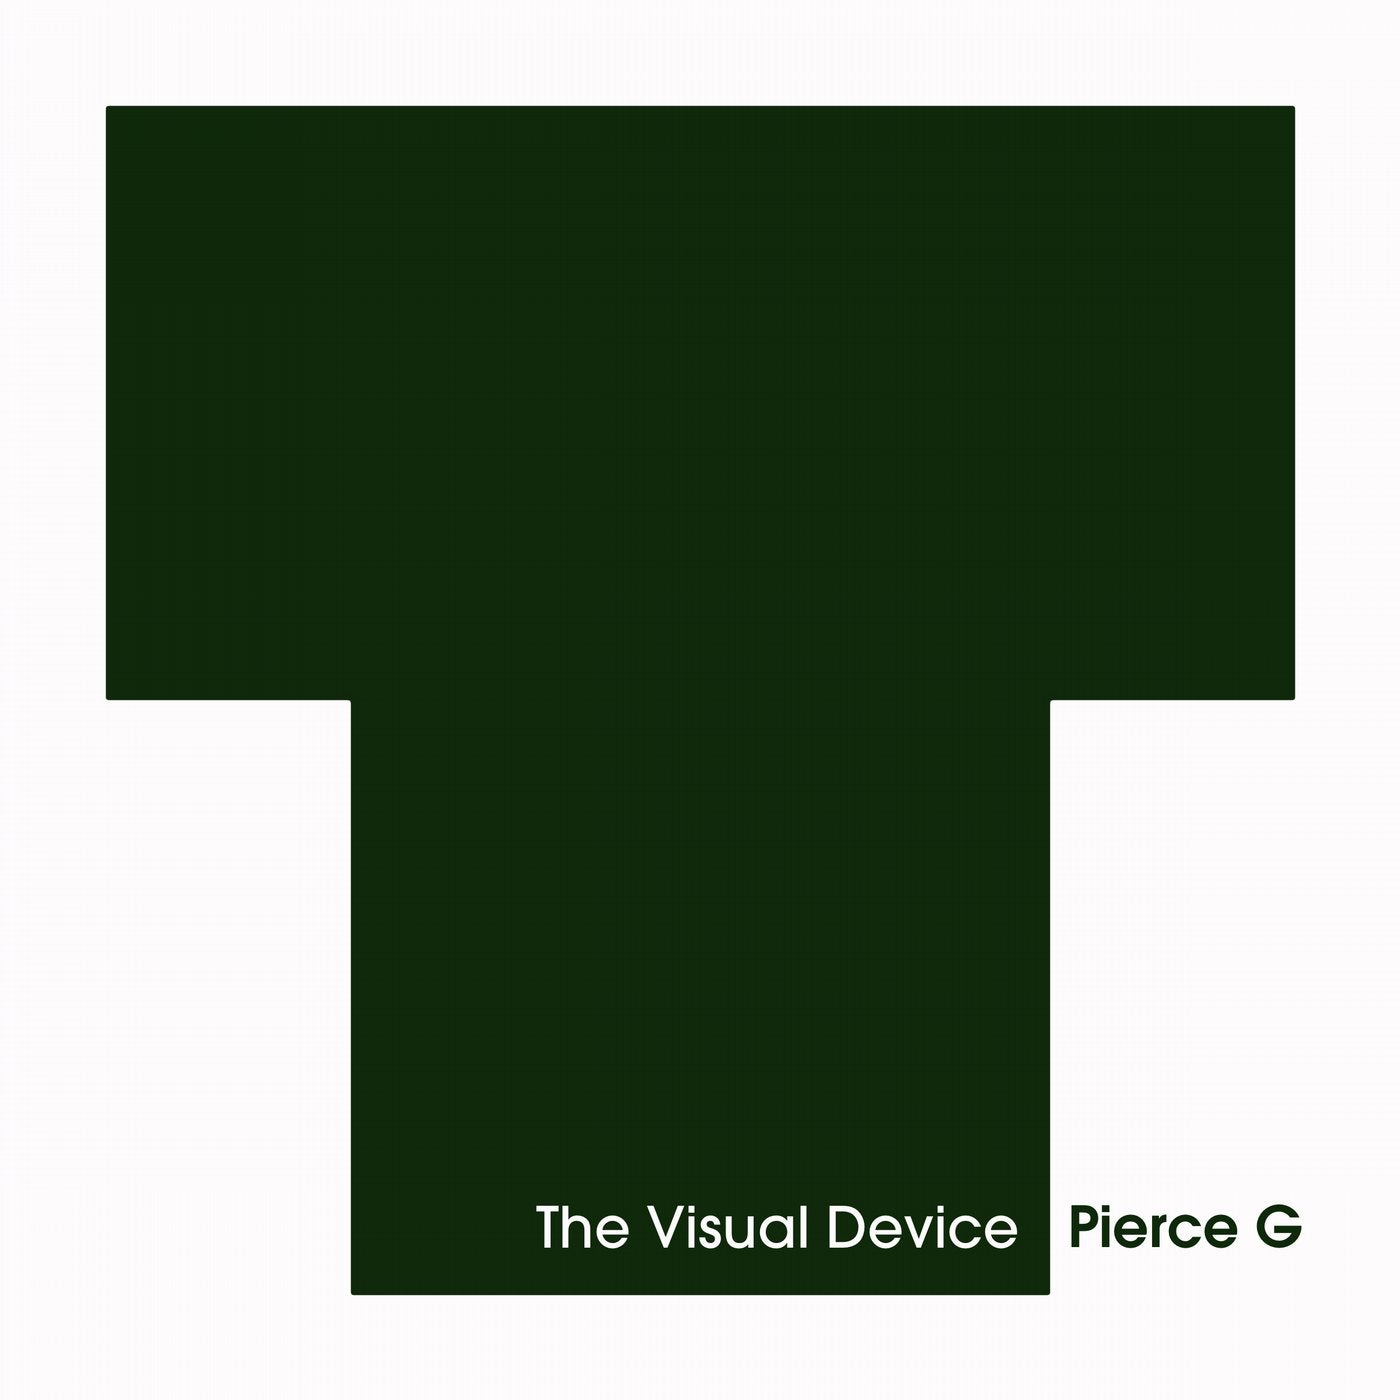 The Visual Device